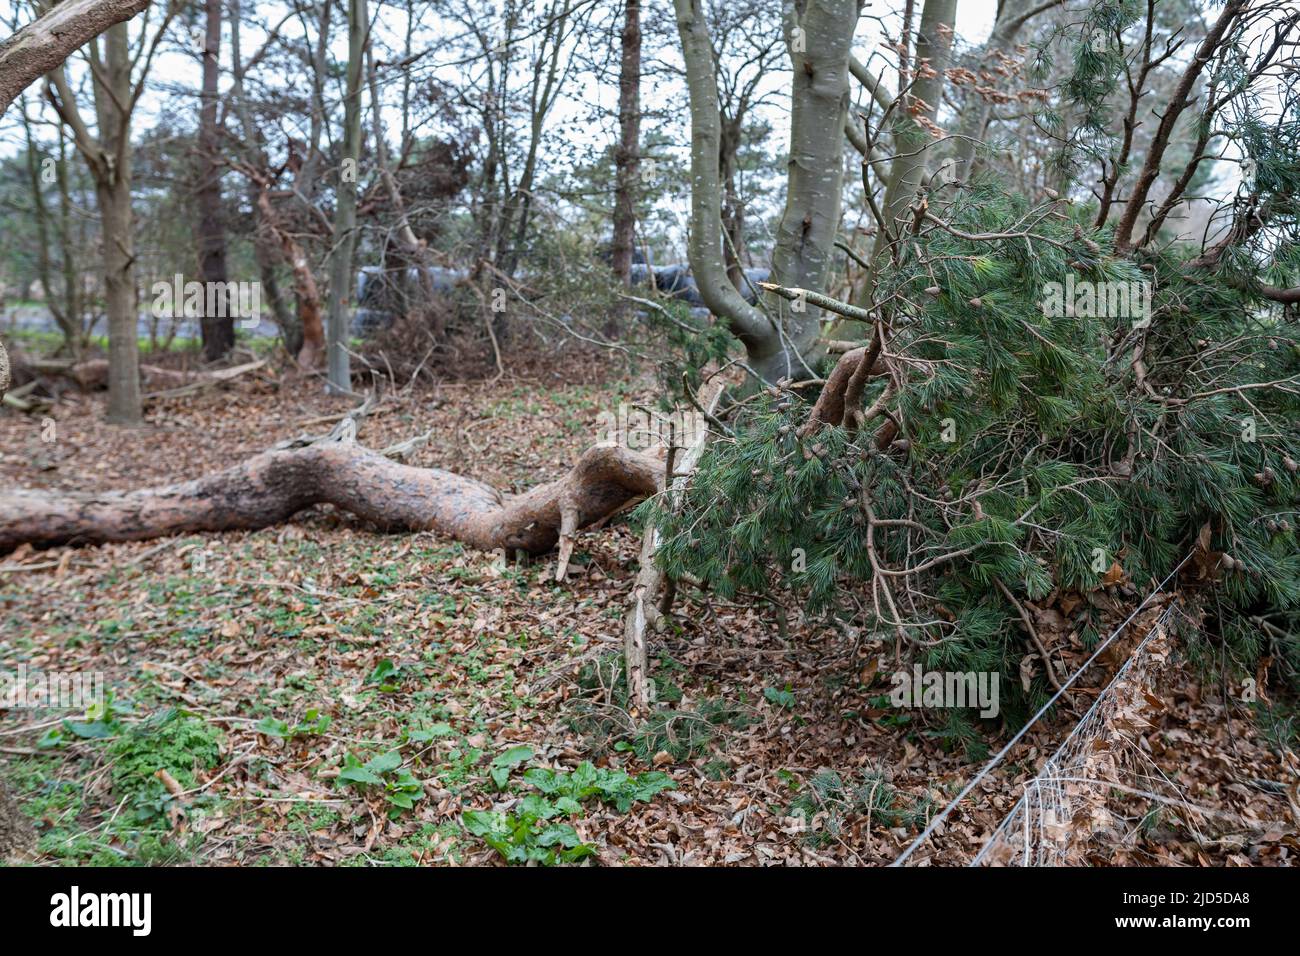 Fallen tree, branches and debris due to bad stormy weather. Climate change, extreme weather, storm concept Stock Photo